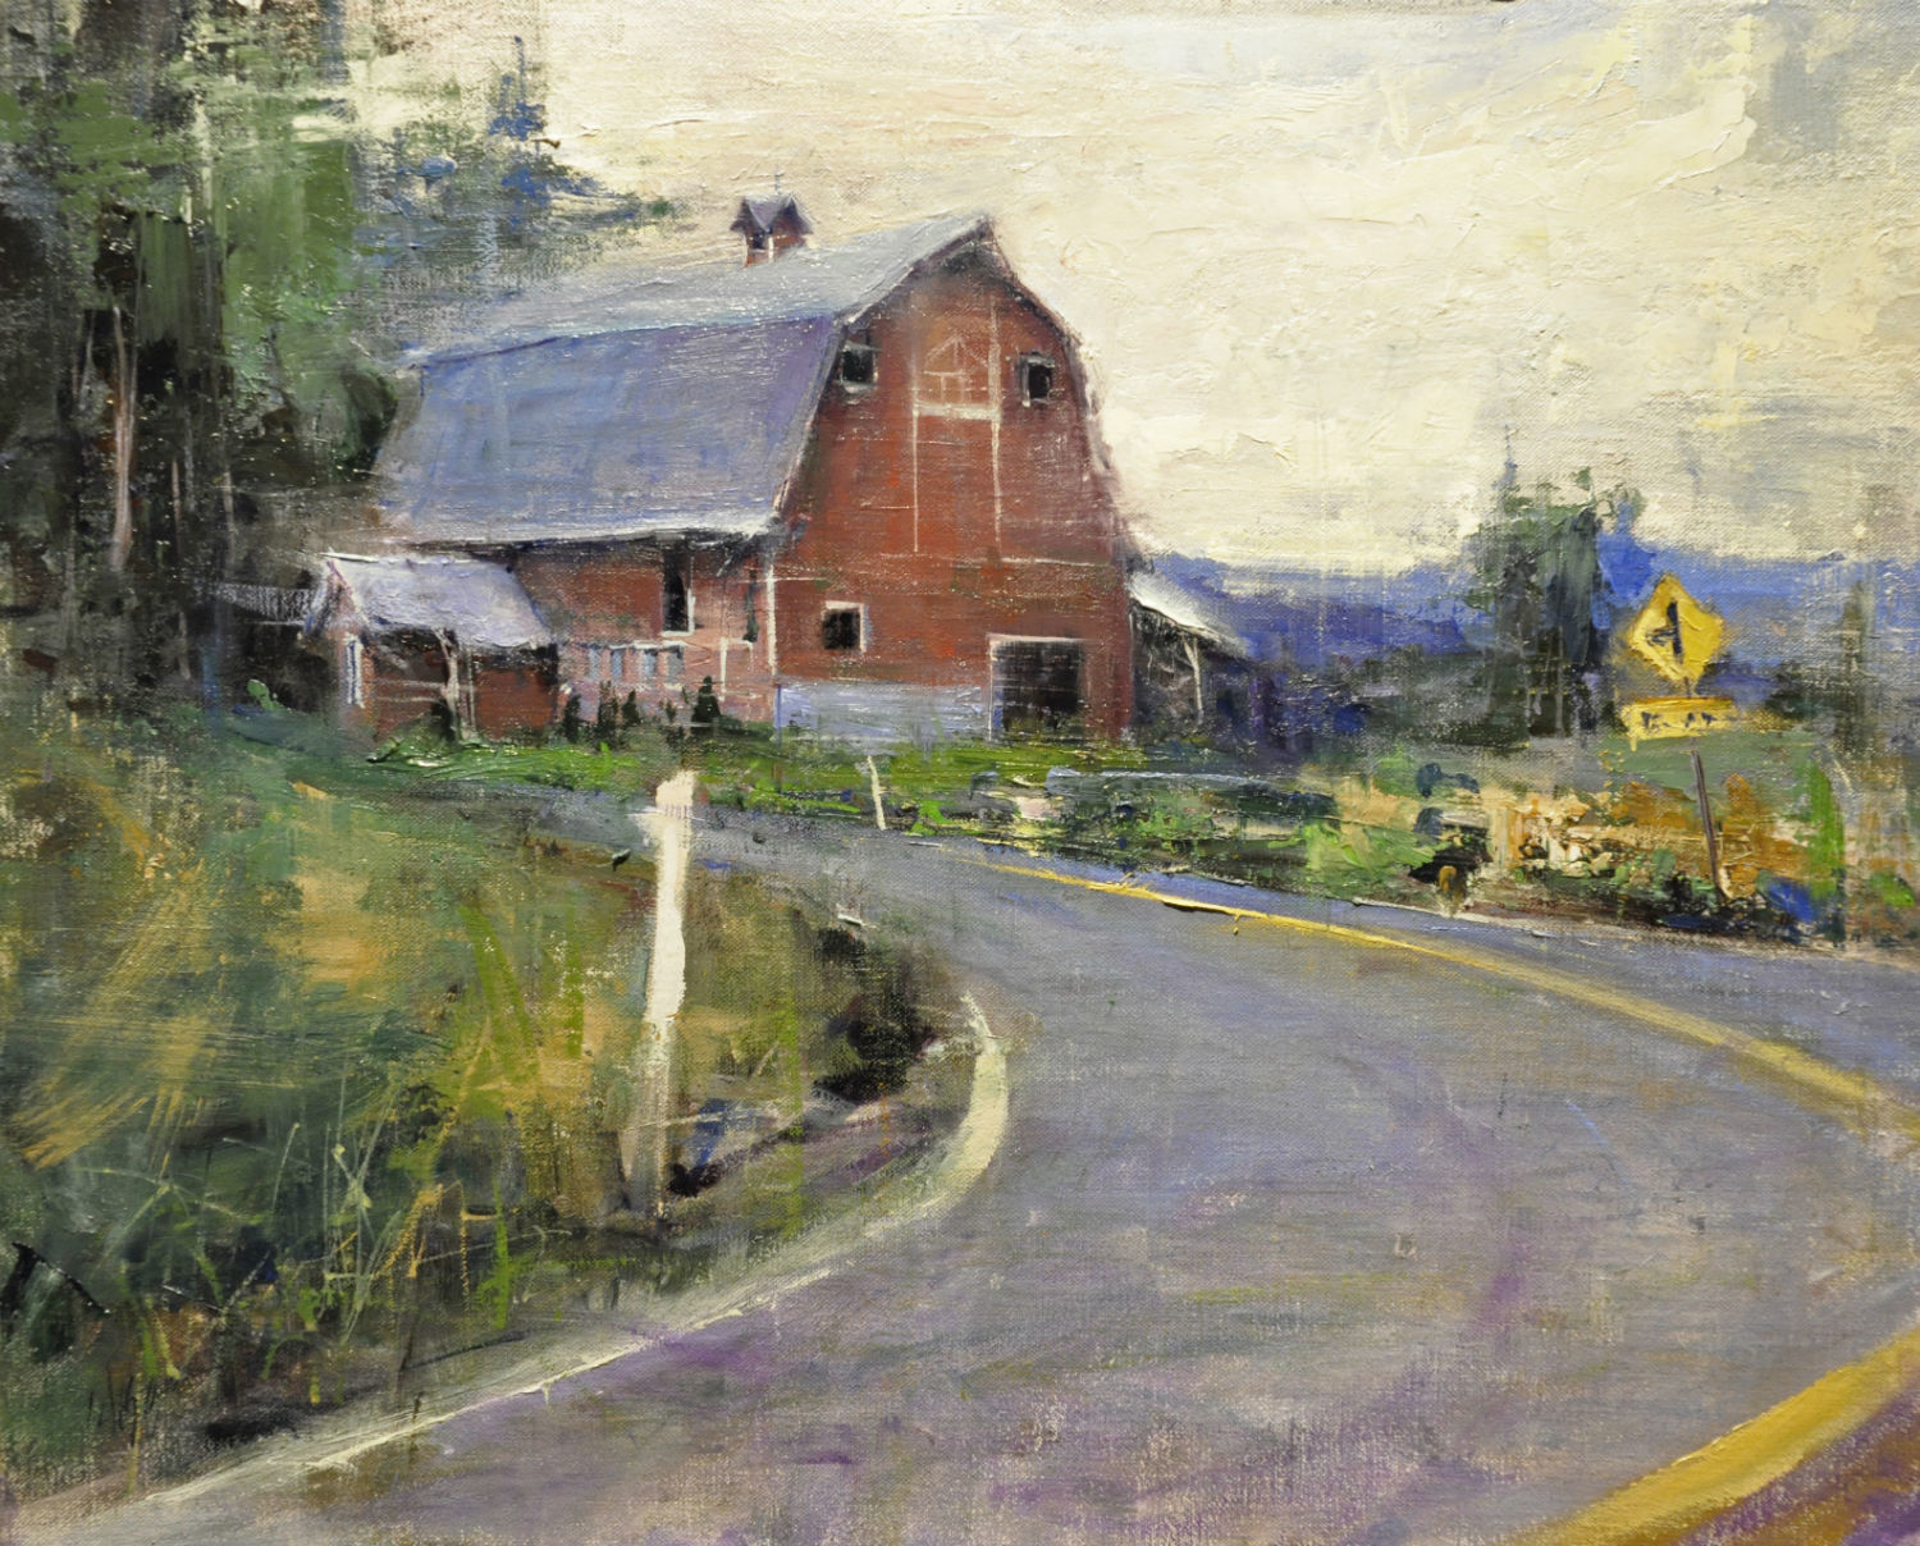 Larimer Road Farm by Mike Wise